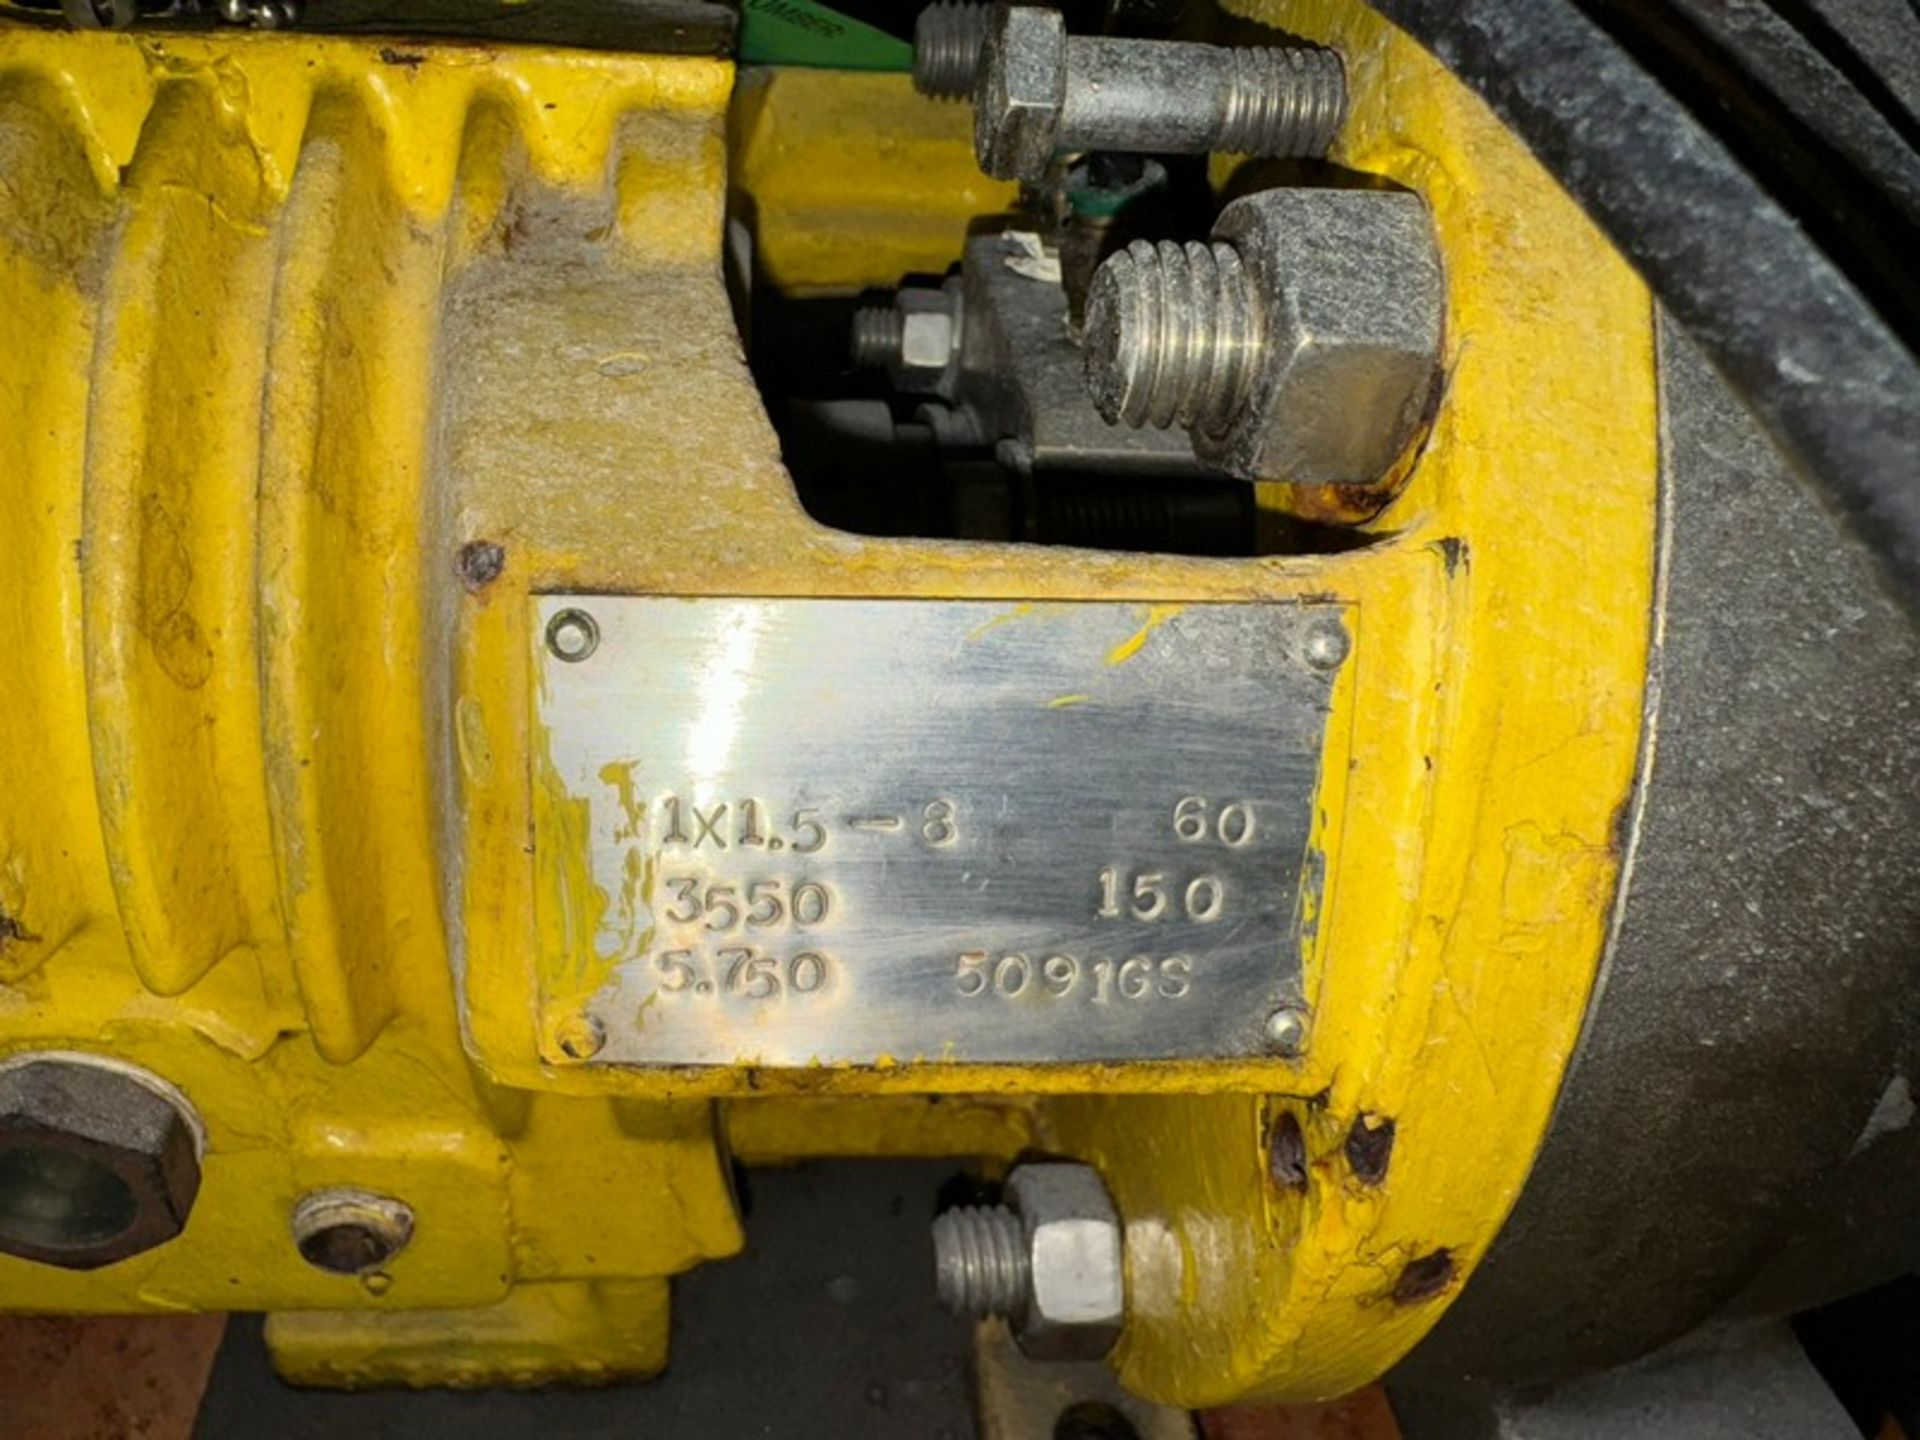 15 hp Pump, Size: 1 x 1.5-8, S/N 3550, with Baldor 3525 RPM Motor, 460 Volts, 3 Phase (N: 028286)( - Image 3 of 4